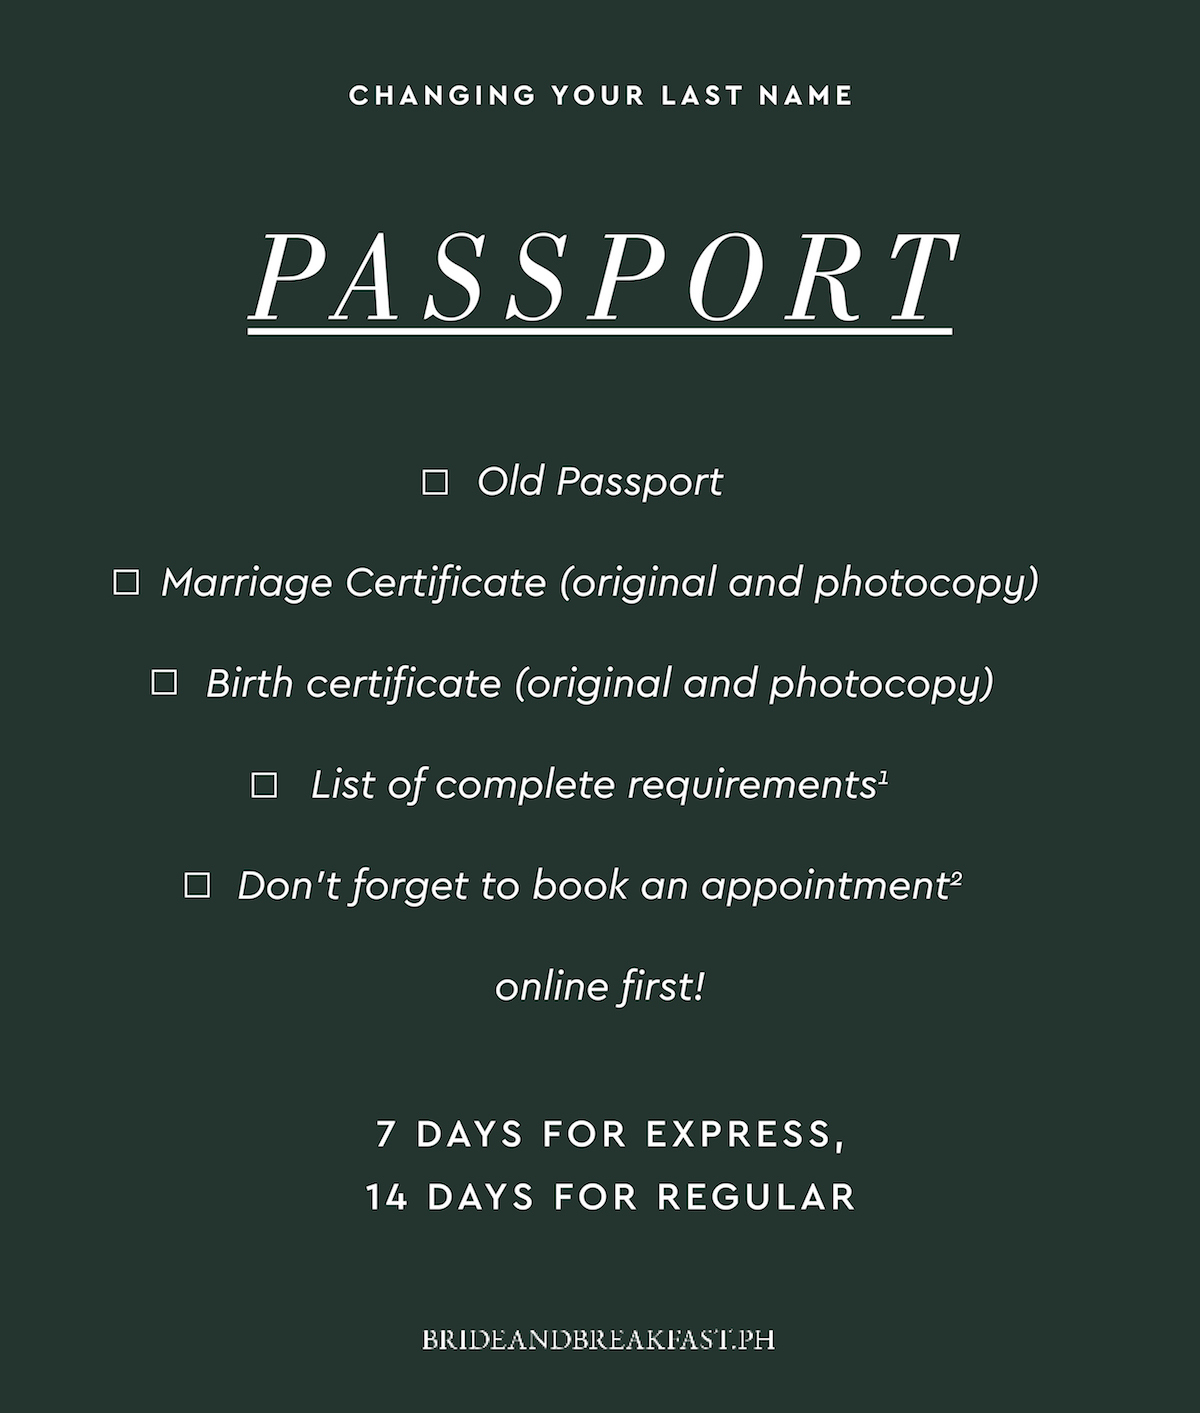 1. Passport Old Passport Marriage Certificate (copy and original) Birth certificate (original and photocopy) List of complete requirements 7 days for express, 14 days for regular Don't forget to book an appointment online first!